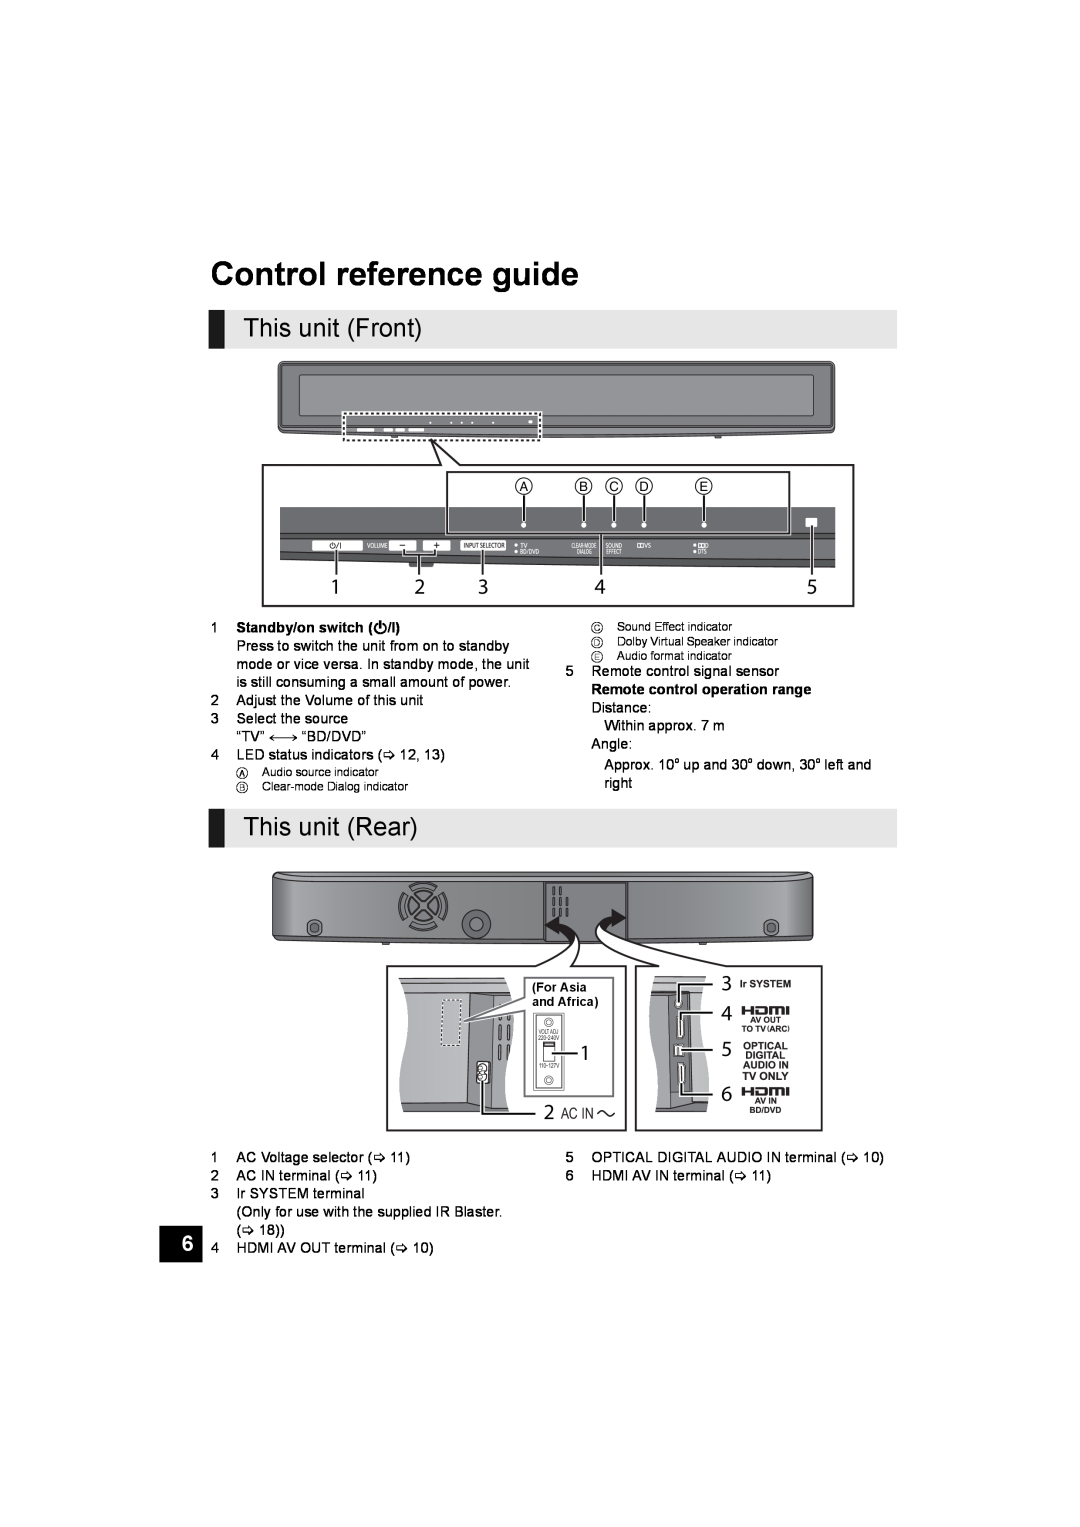 Panasonic SC-HTB10 operating instructions Control reference guide, This unit Front, This unit Rear,      